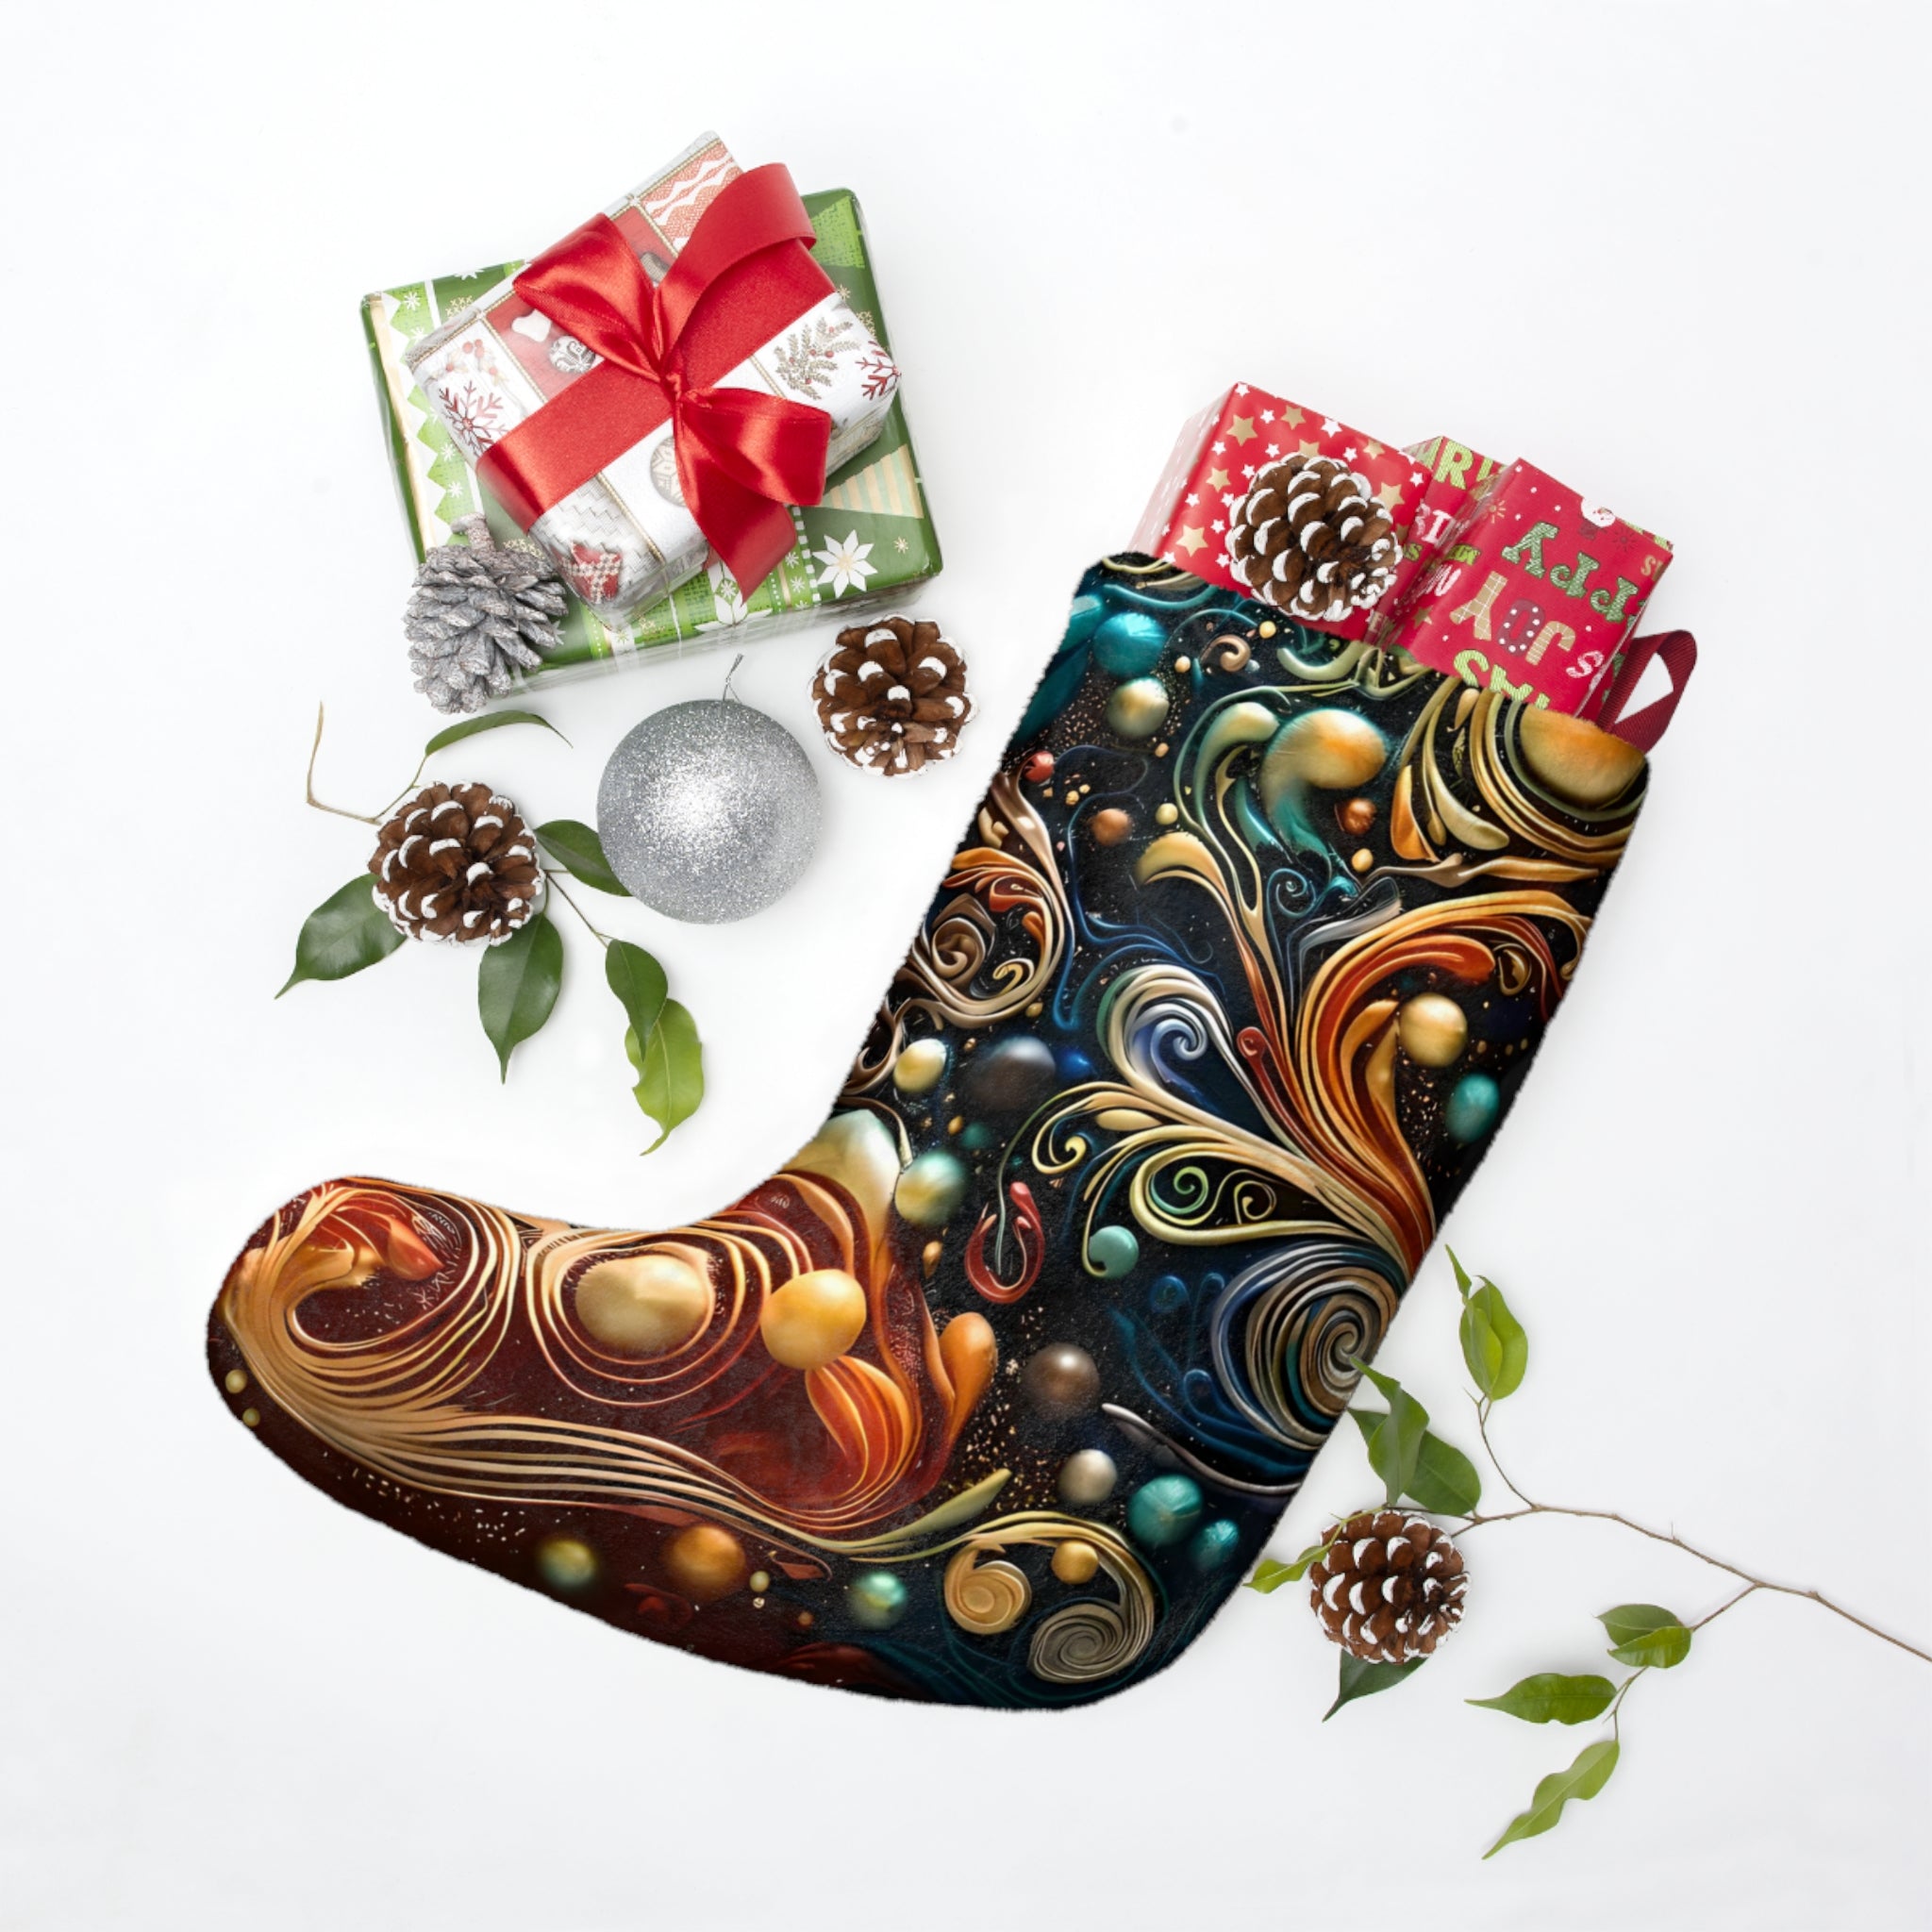 Merry Mantel Mates - Christmas Stockings (double-sided, no cuff)